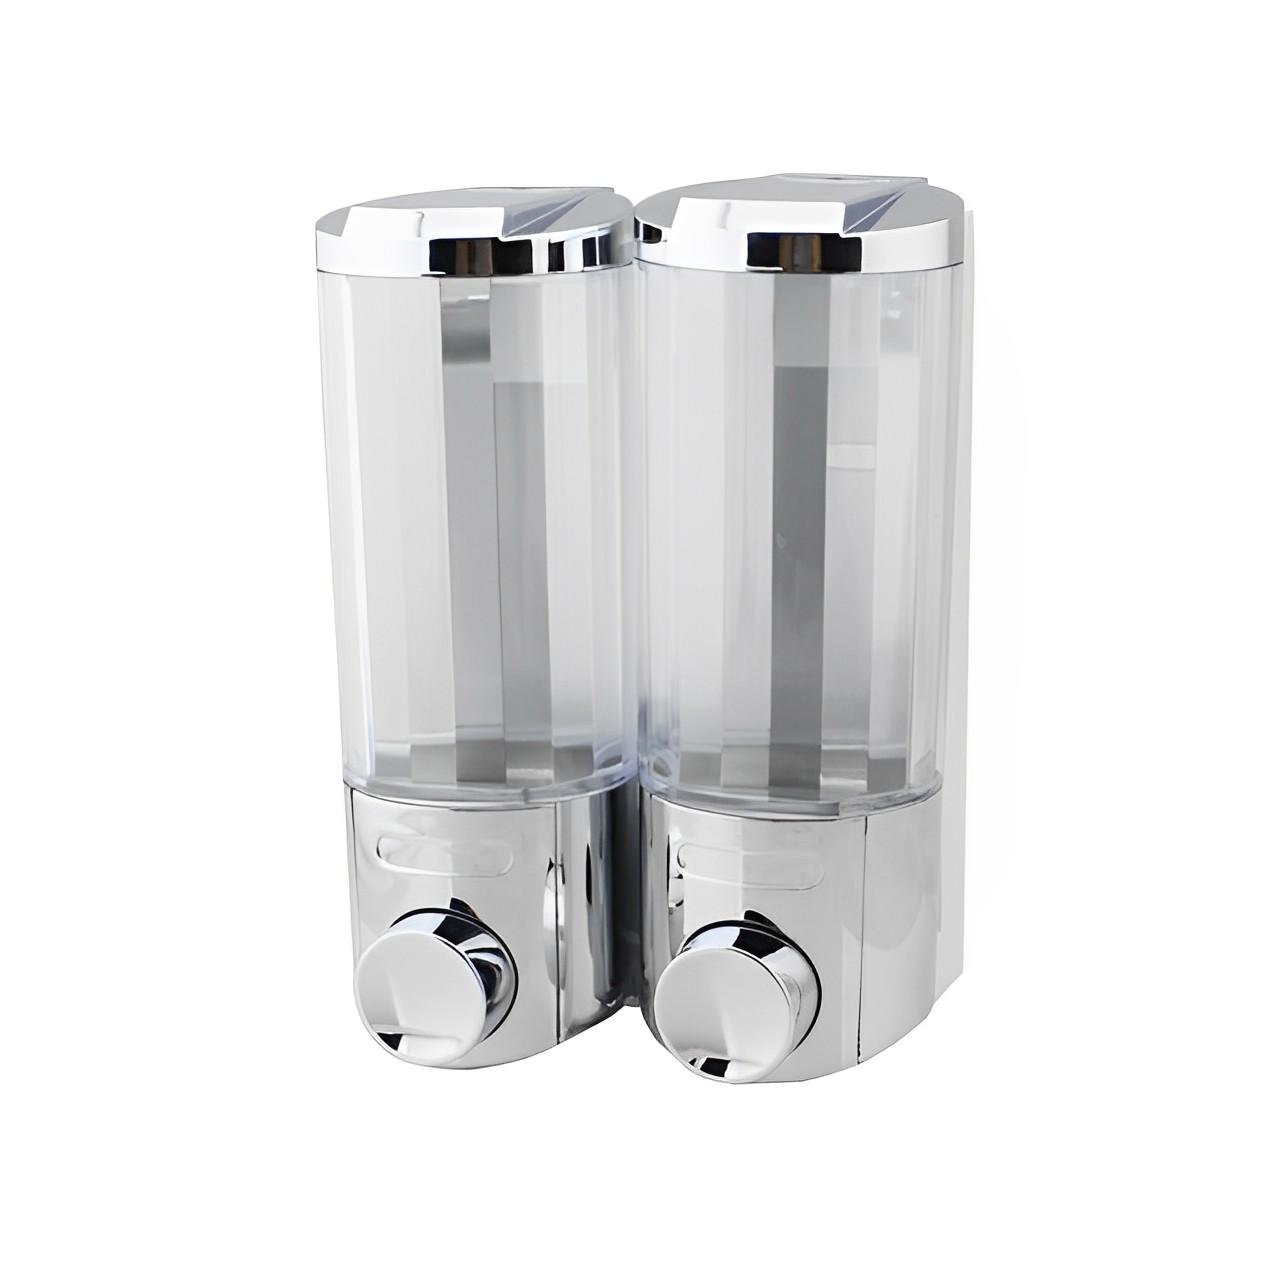 OJ-YL31C-D 2-Chamber Liquid Soap Dispensers ABS Plastic Drill Free with Adhesive or Wall Mount with Screws Liquid Soap Dispenser